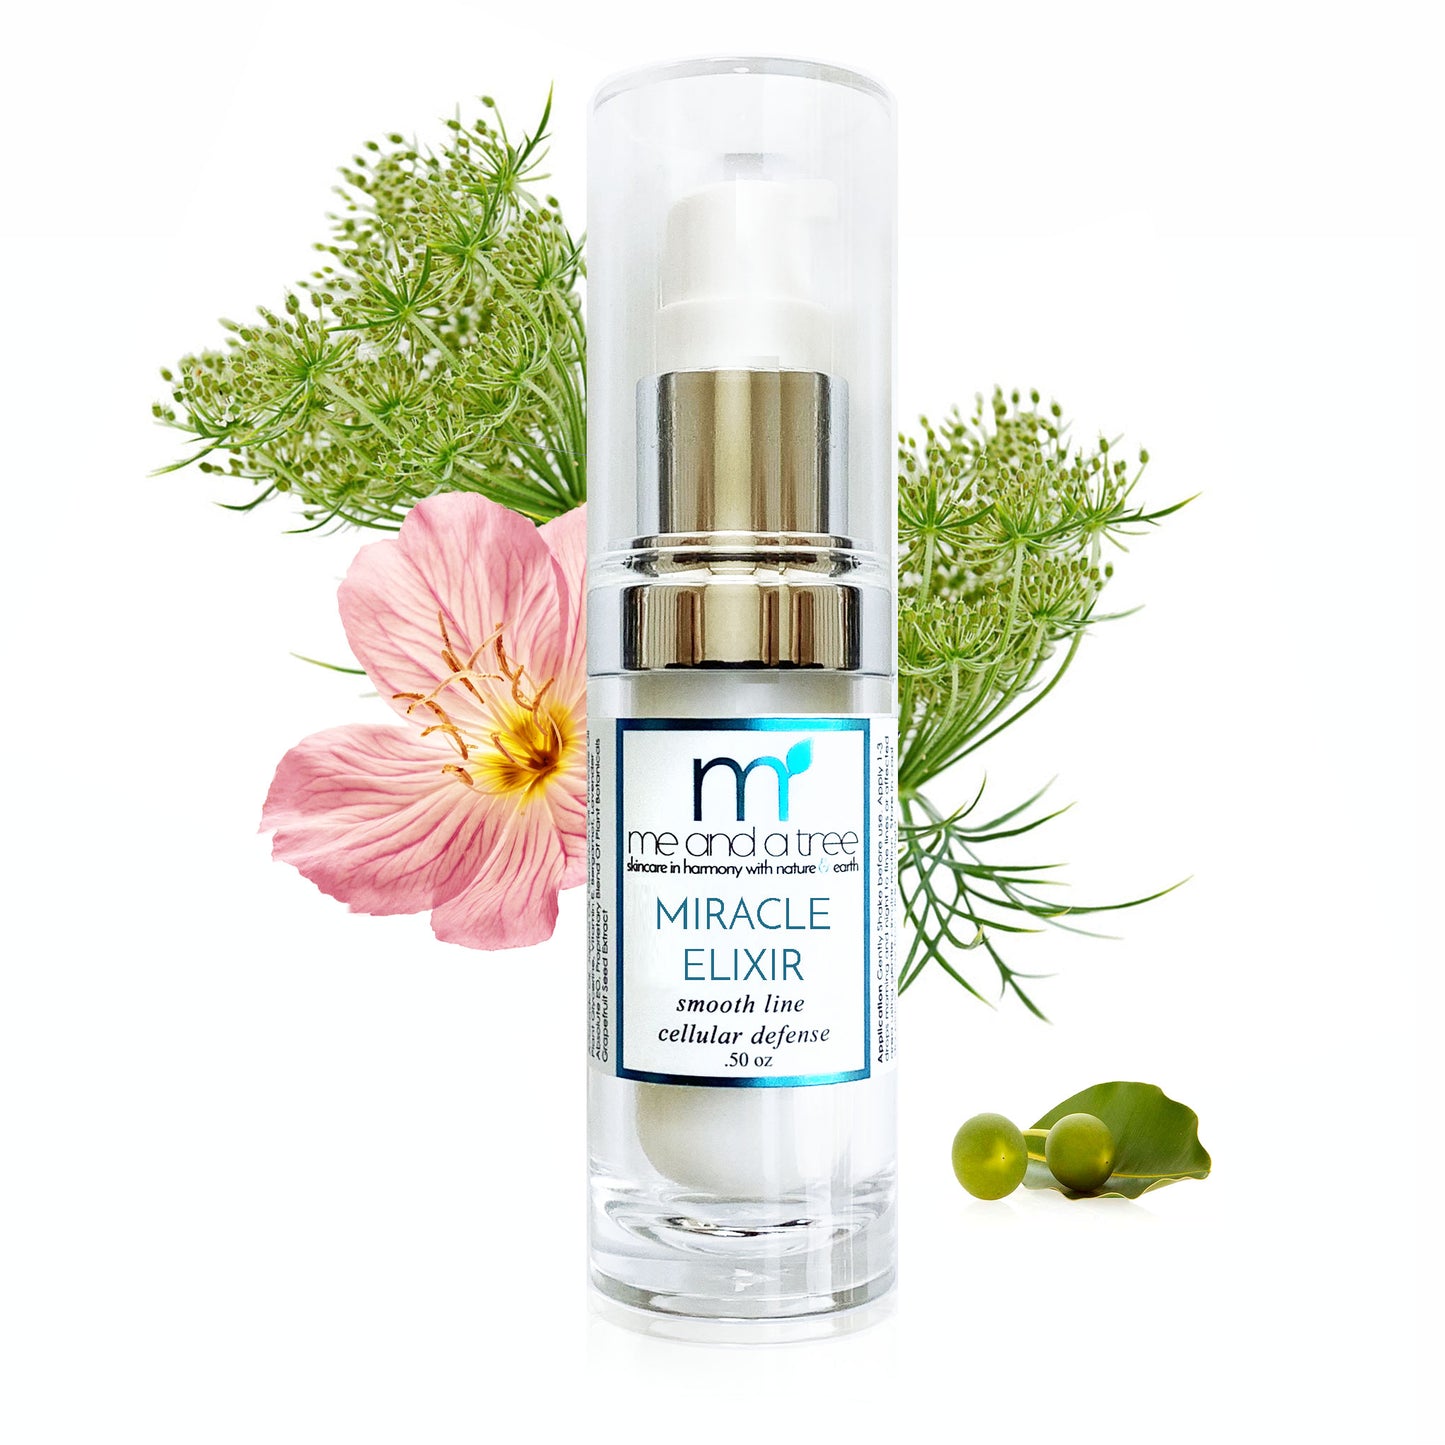 Image of Miracle Elixir natural face skin care serum with tamanu and carrot seed oil, formulated with pure botanical extracts, rich in vitamins and minerals. Apply twice daily for best results in reducing fine lines, wrinkles, dark spots, and skin irritation